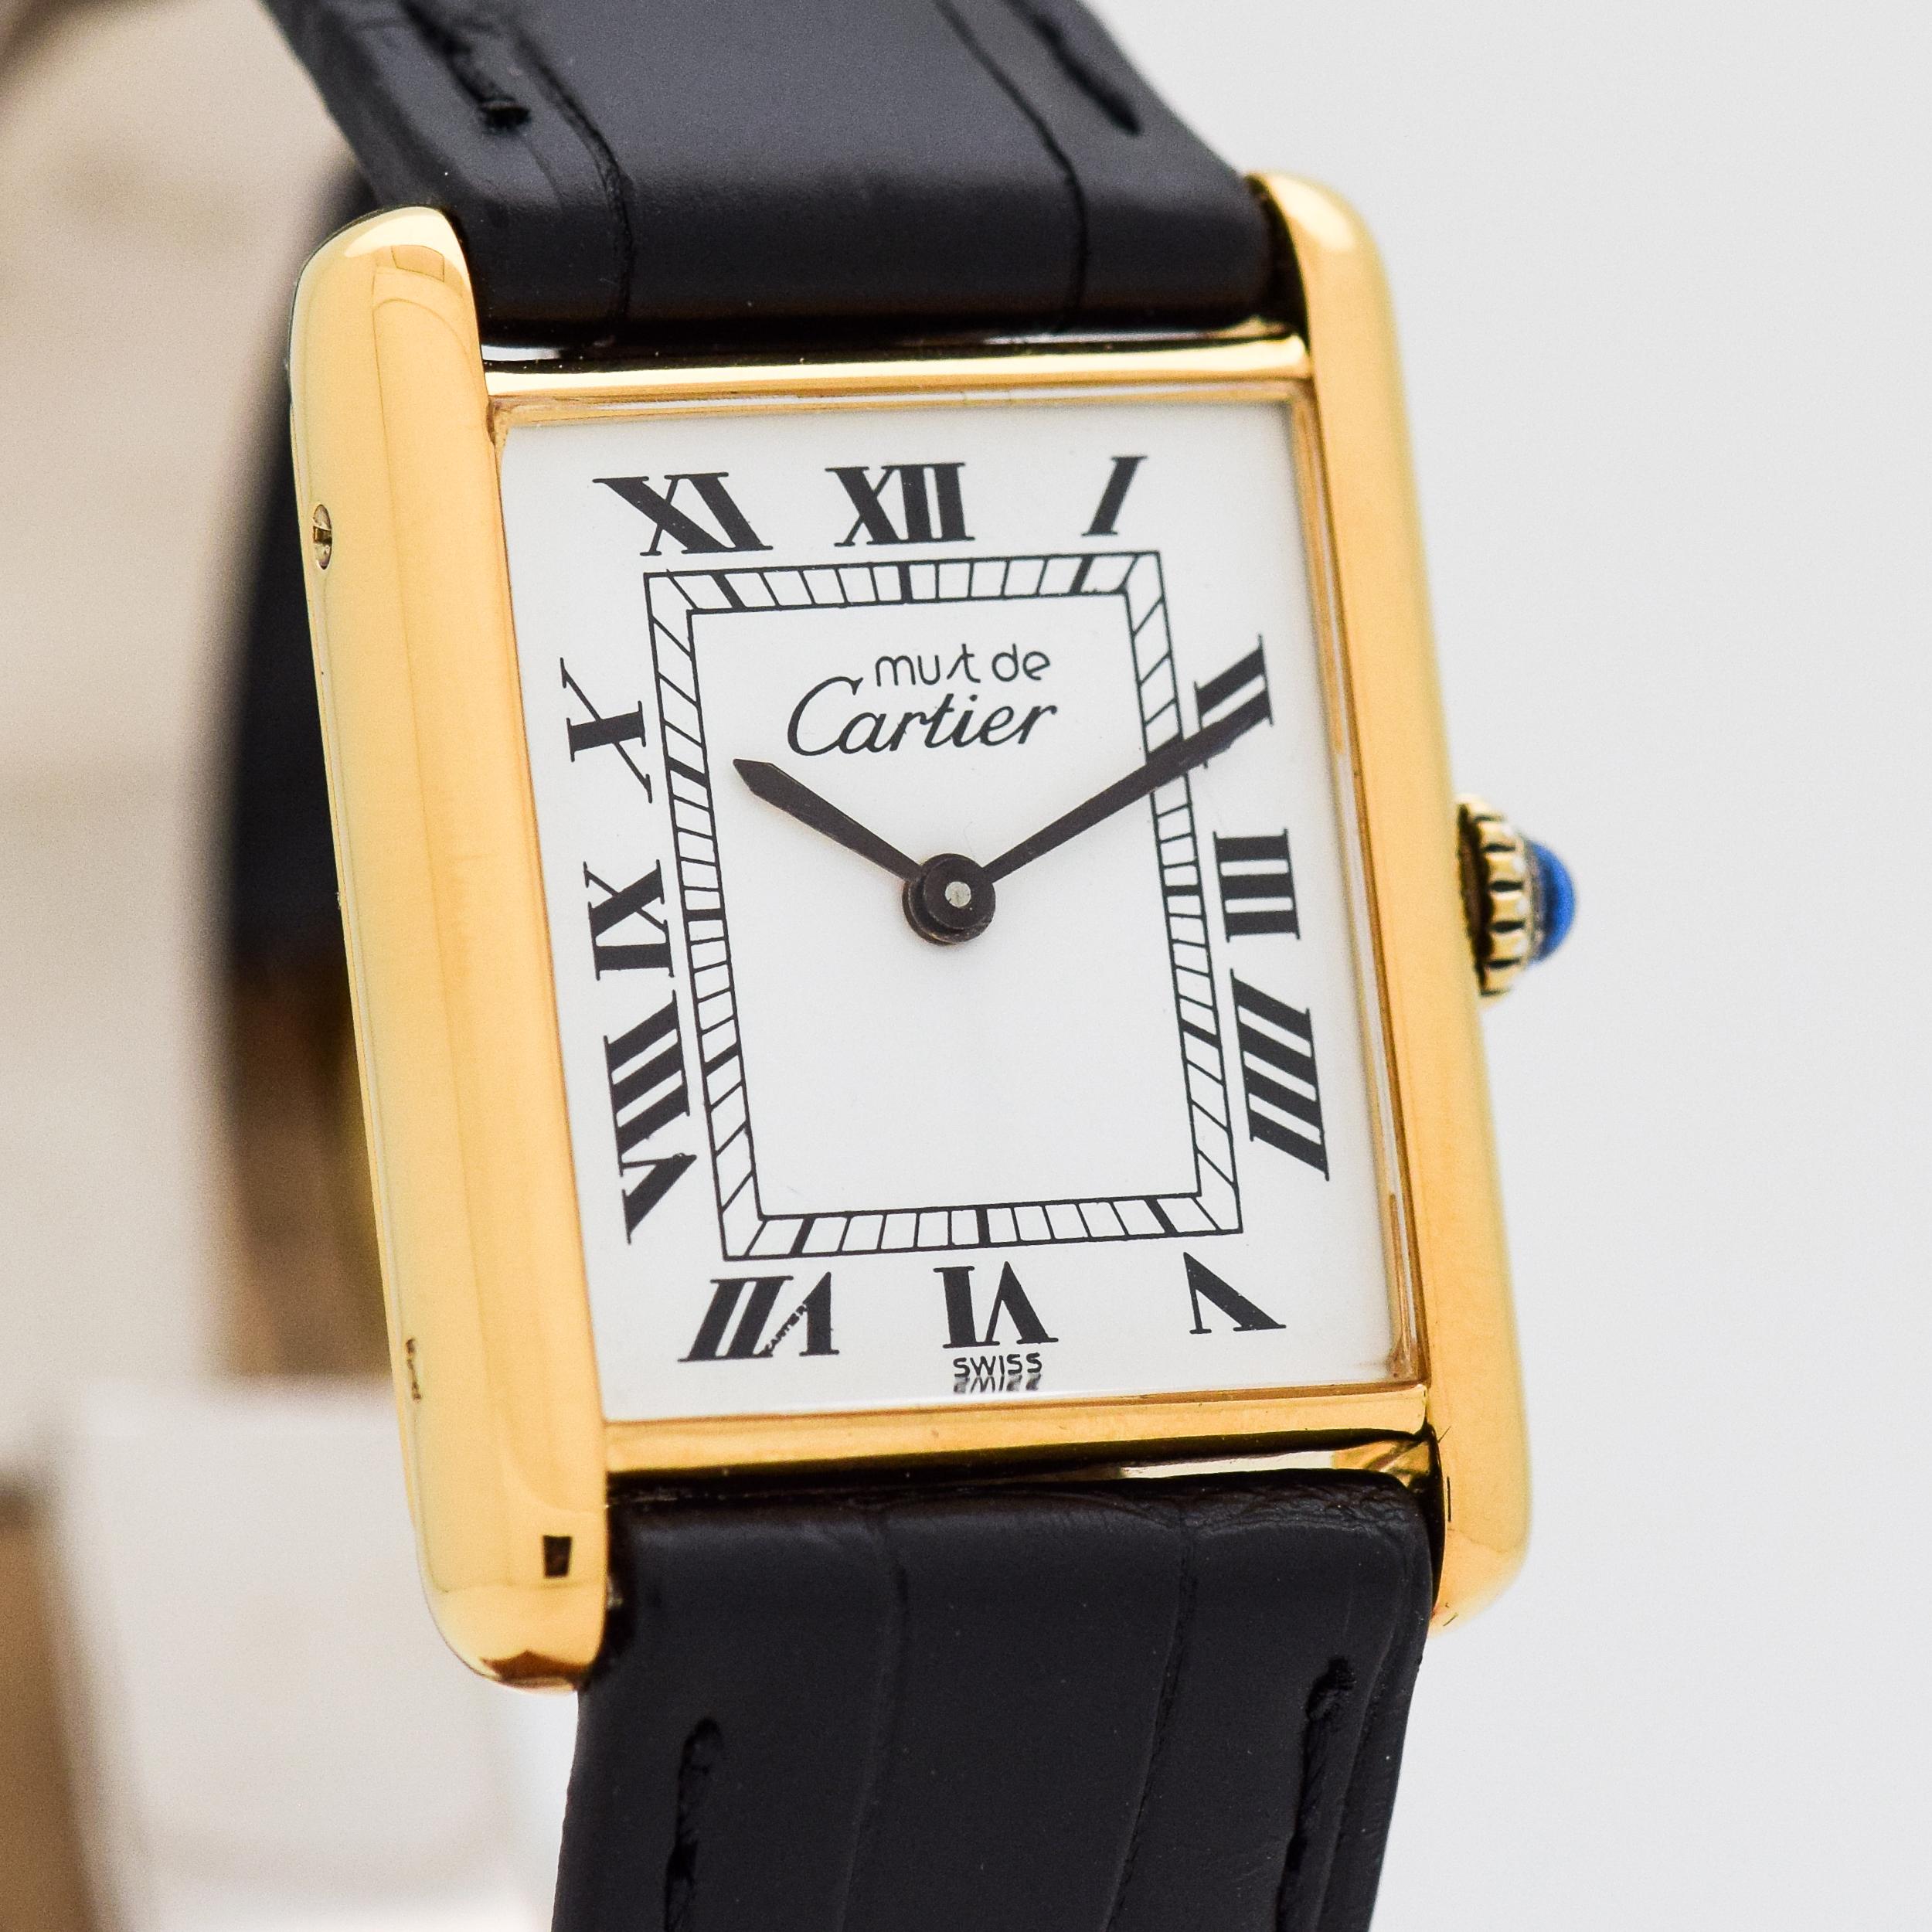 1980's Vintage Cartier Men's Classic Size Must de Tank 18k Yellow Gold Plated Over Sterling Silver watch with Original White Dial with Black Roman Numerals. 23mm x 30mm lug to lug (0.91 in. x 1.18 in.) - 17 jewel, manual caliber ETA movement.